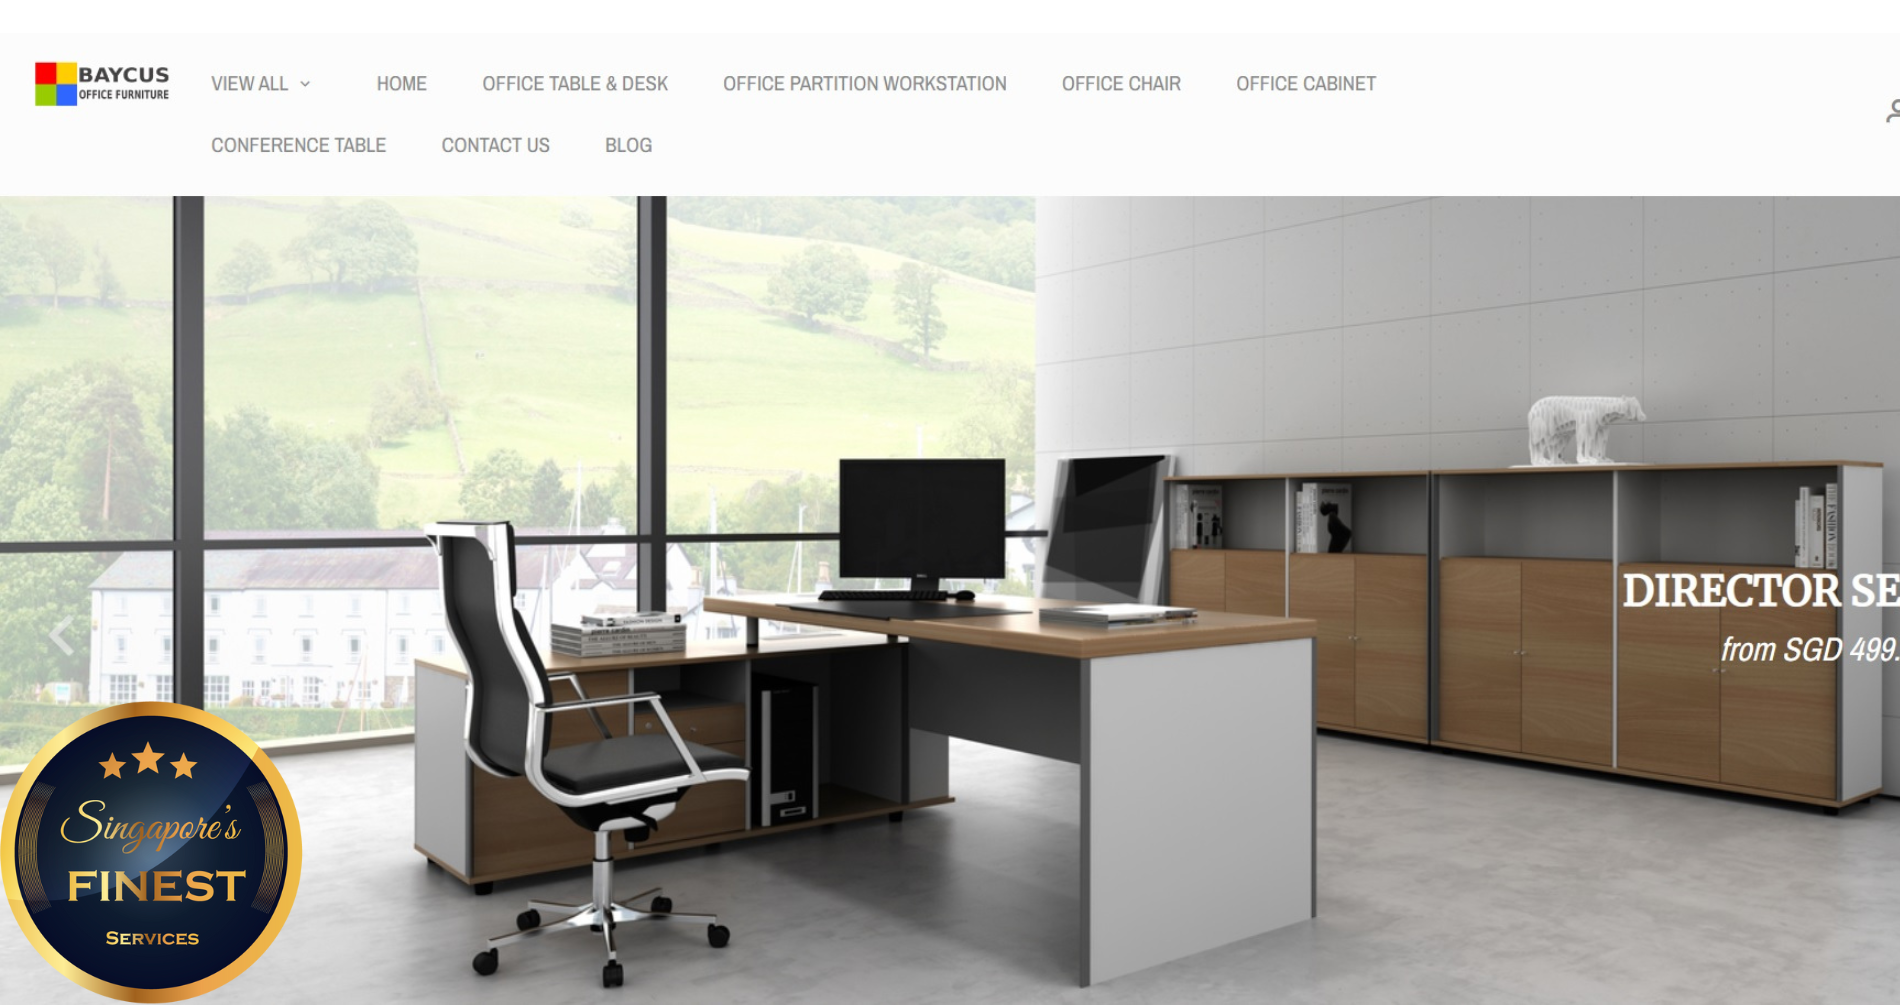 Baycus Office Furniture - Office Furniture Singapore